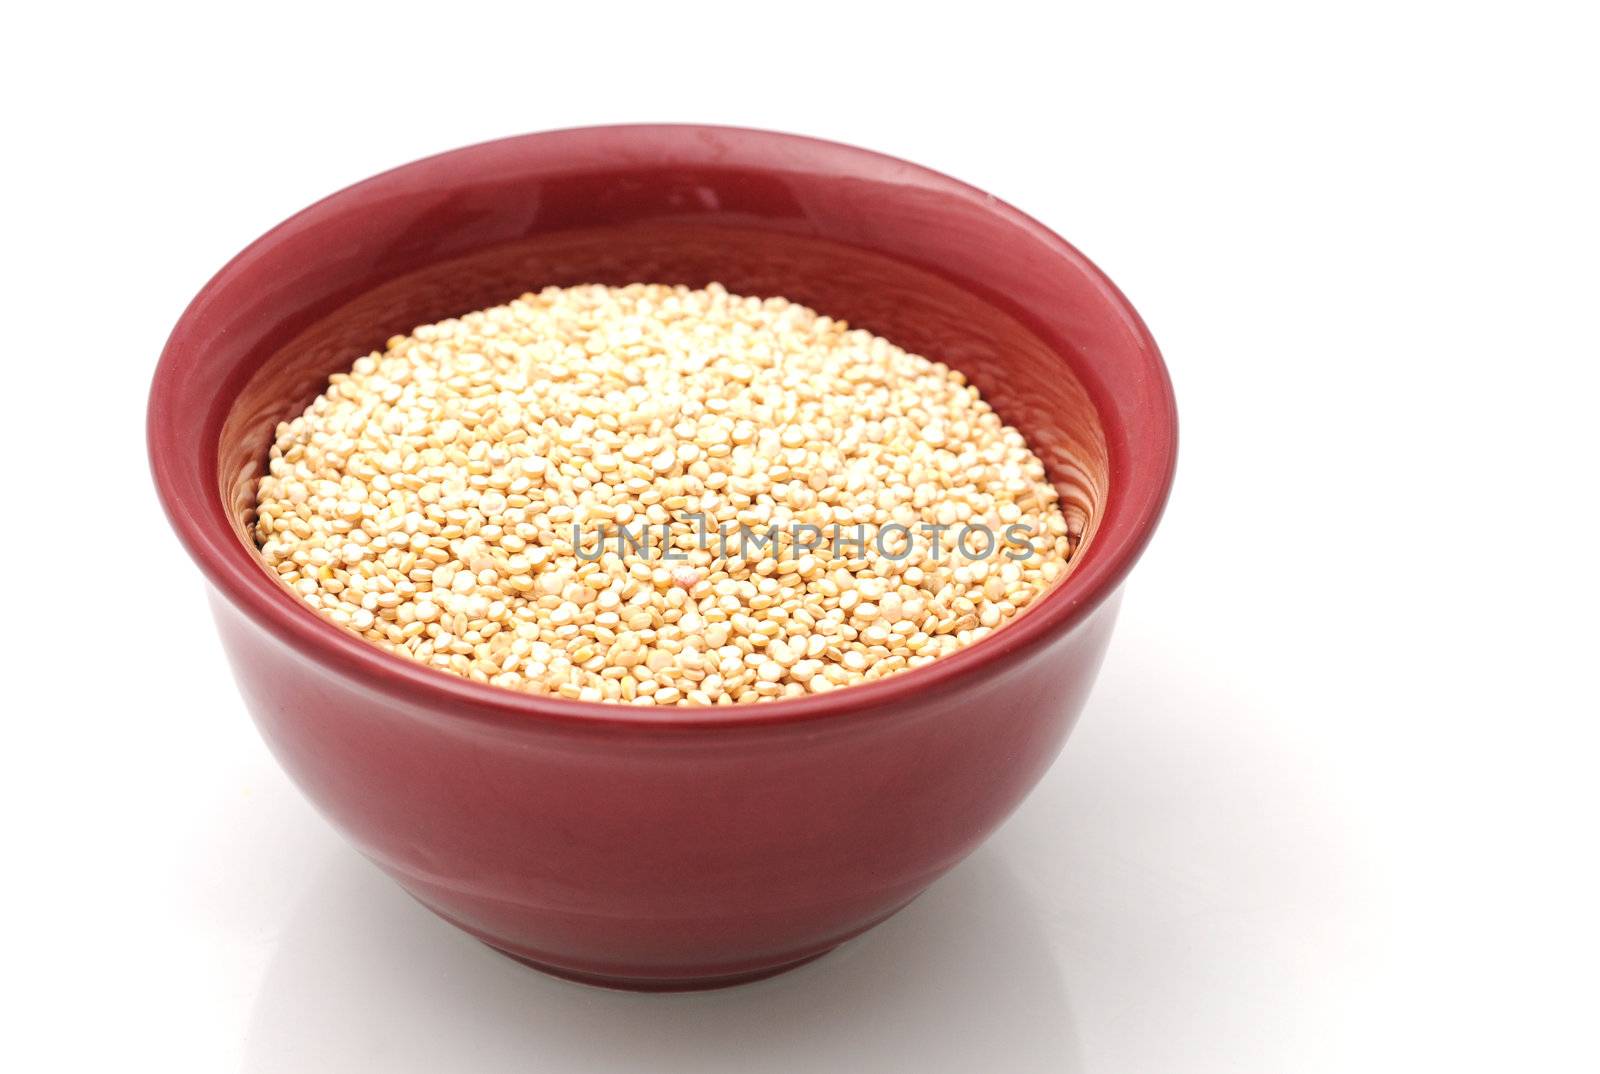 Raw whole grain quinoa in a red bowl isolated